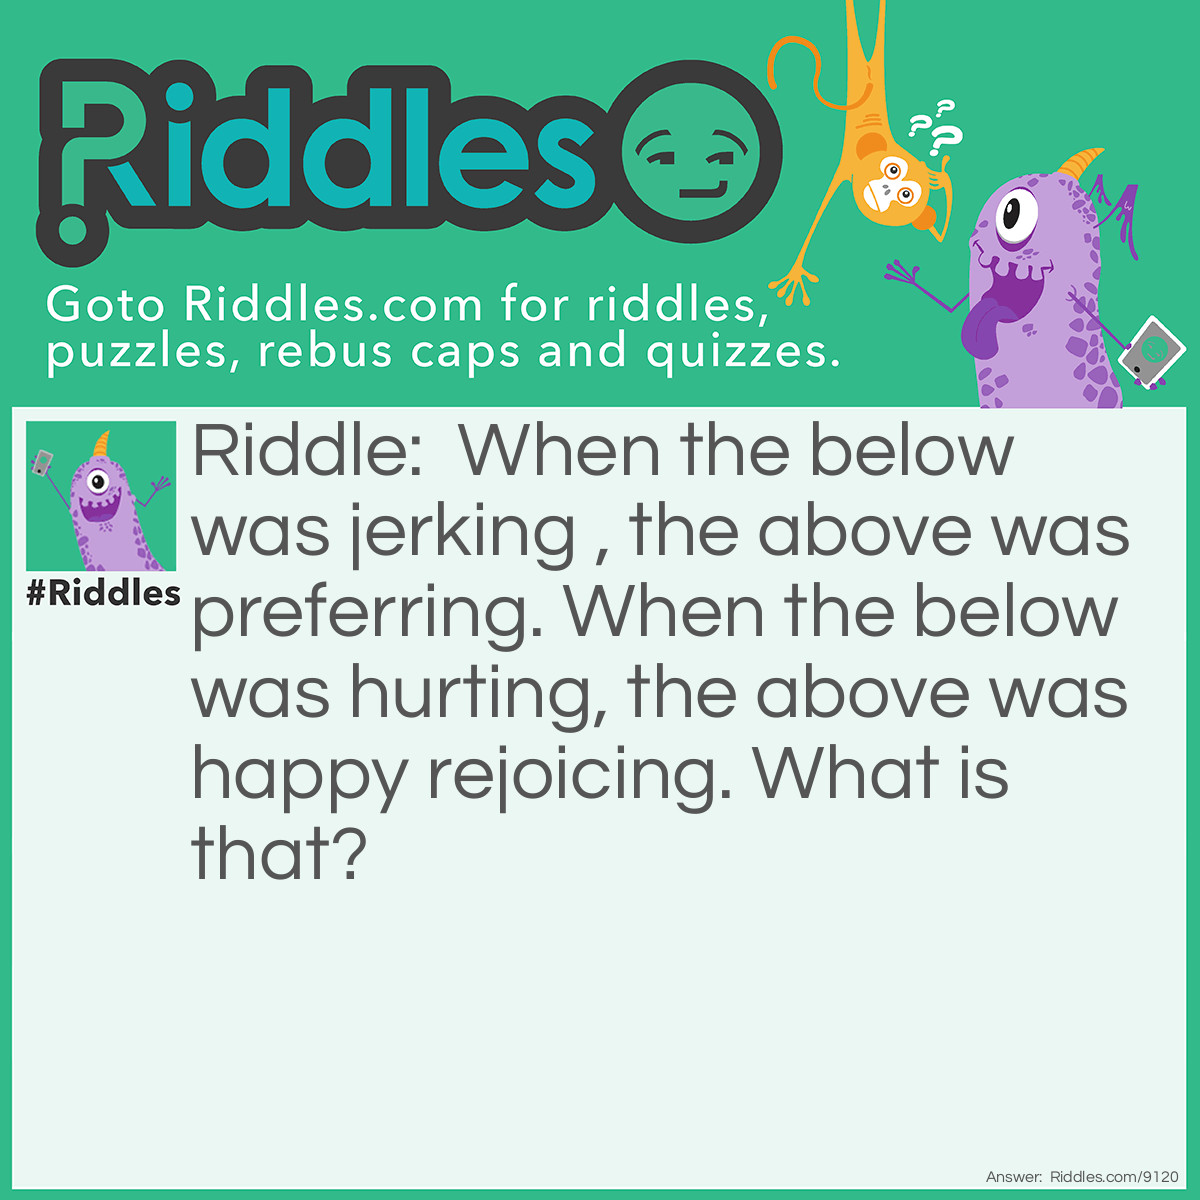 Riddle: When the below was jerking , the above was preferring. When the below was hurting, the above was happy rejoicing. What is that? Answer: That is fishing.